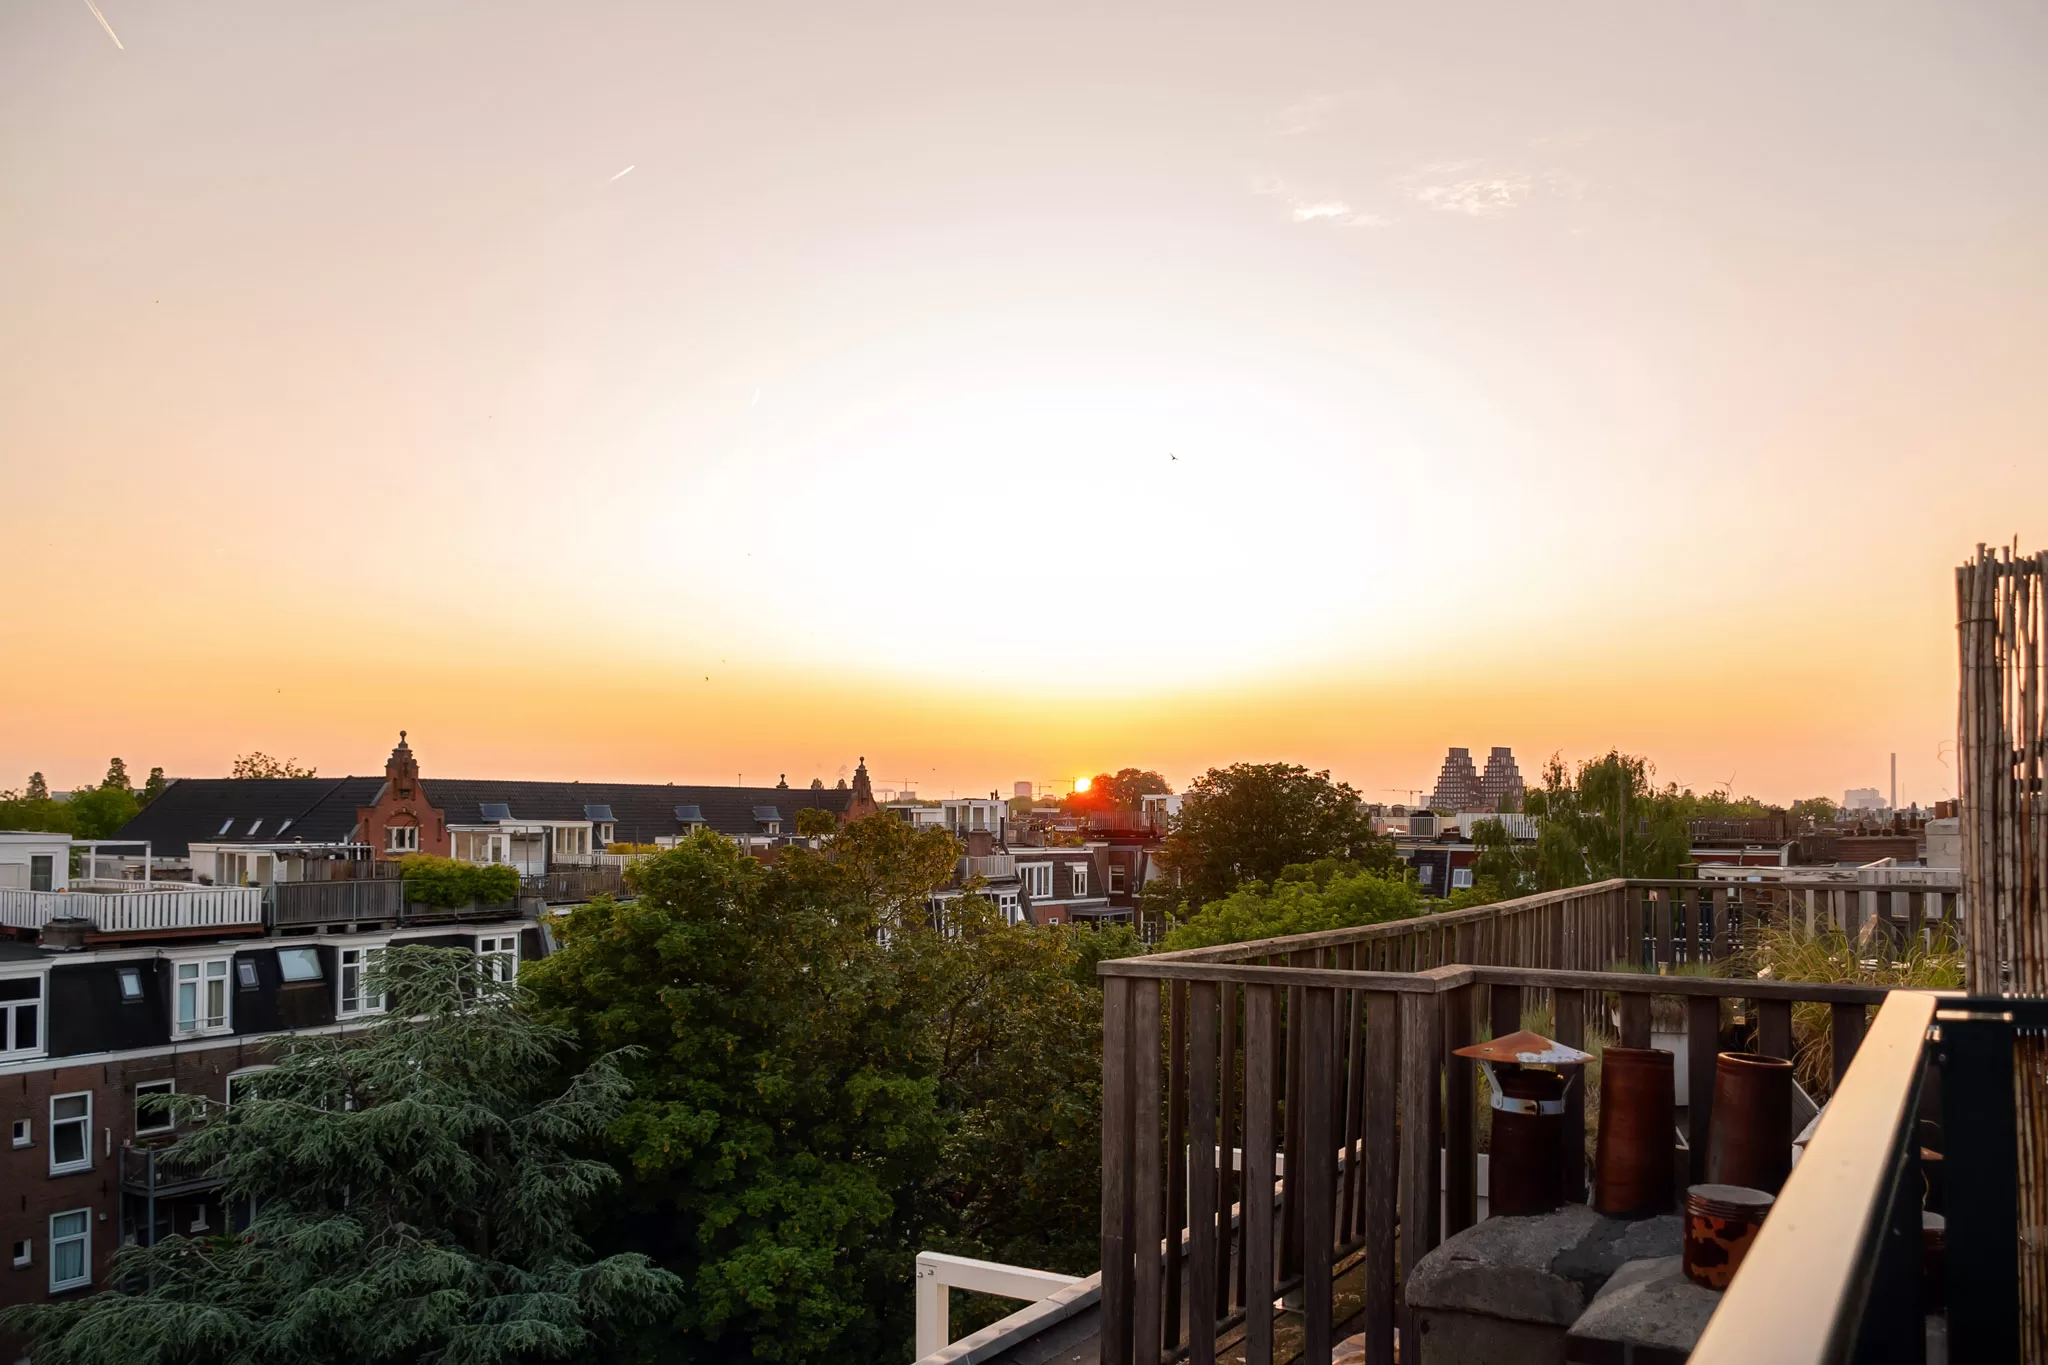 Amsterdam rooftop sunset views from Oud-West